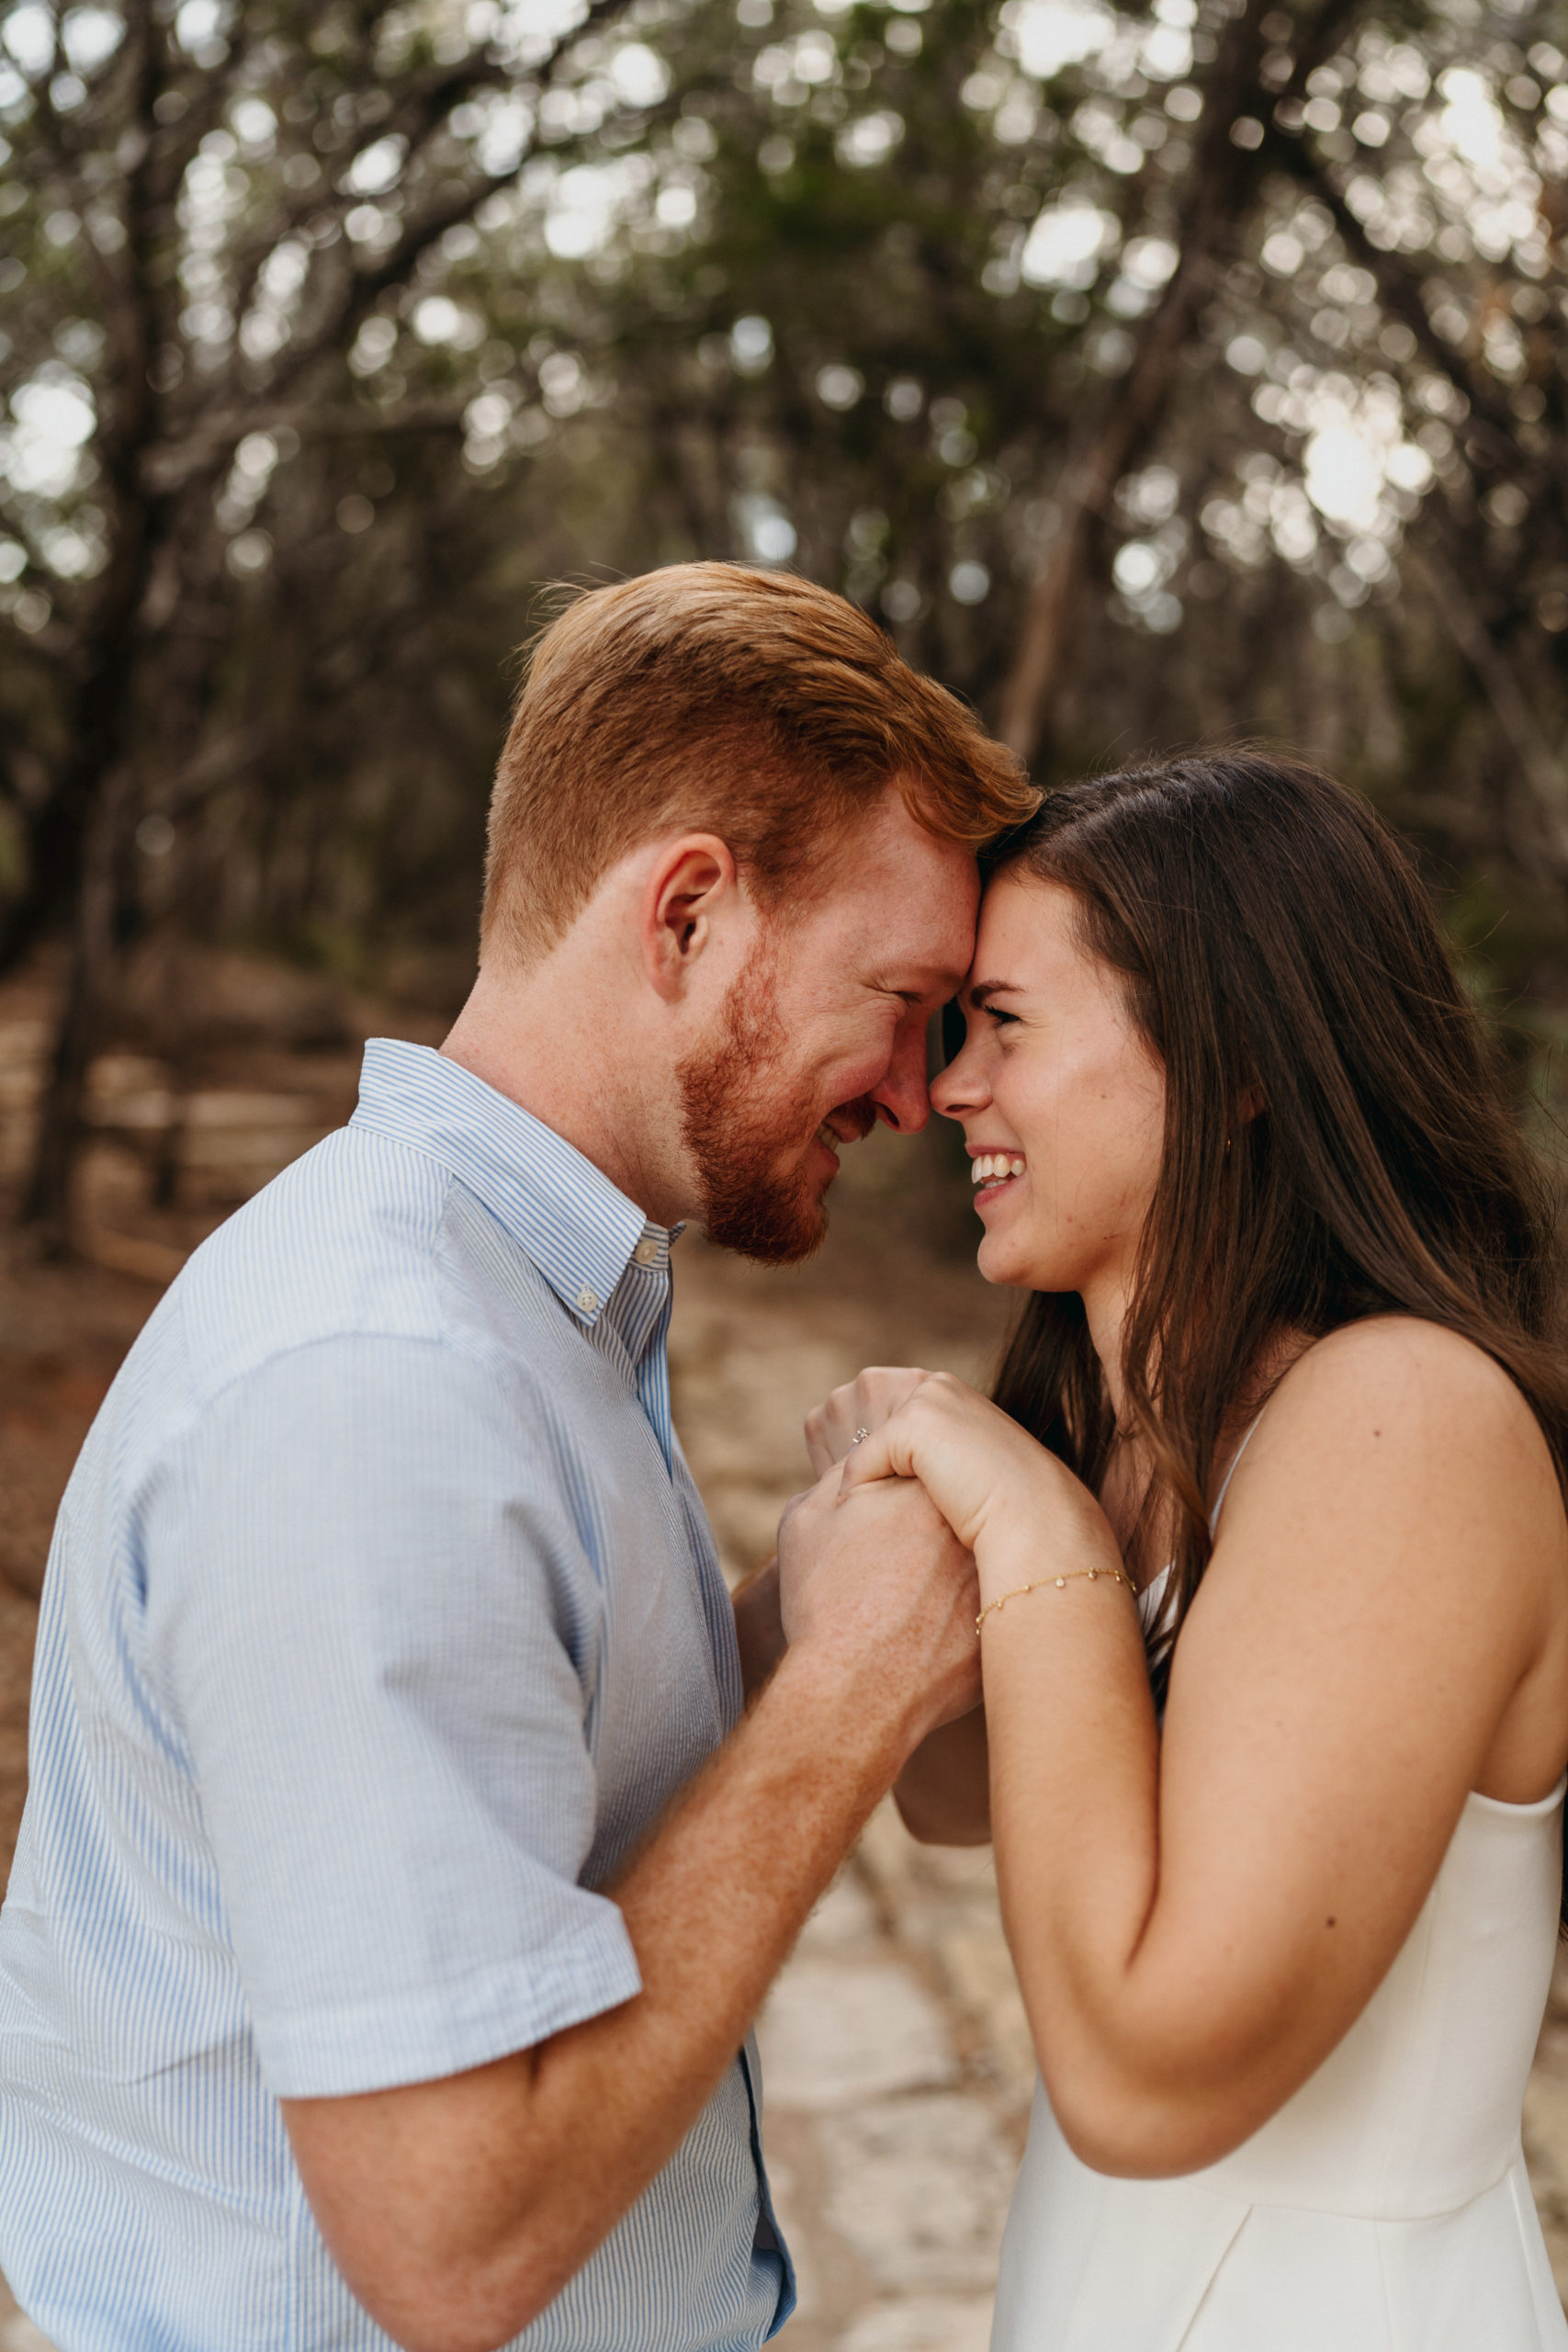 This timeless engagement session took place at the gorgeous Pedernales Falls State Park in Austin, Texas. We hiked the stunning Texas landscape to come across the infamous falls for their adventure engagement session. The couple’s outfit perfectly exuded their personality while also letting the scenery speak for itself. Angelina Loreta Photography created timeless engagement pictures for the Austin couple.